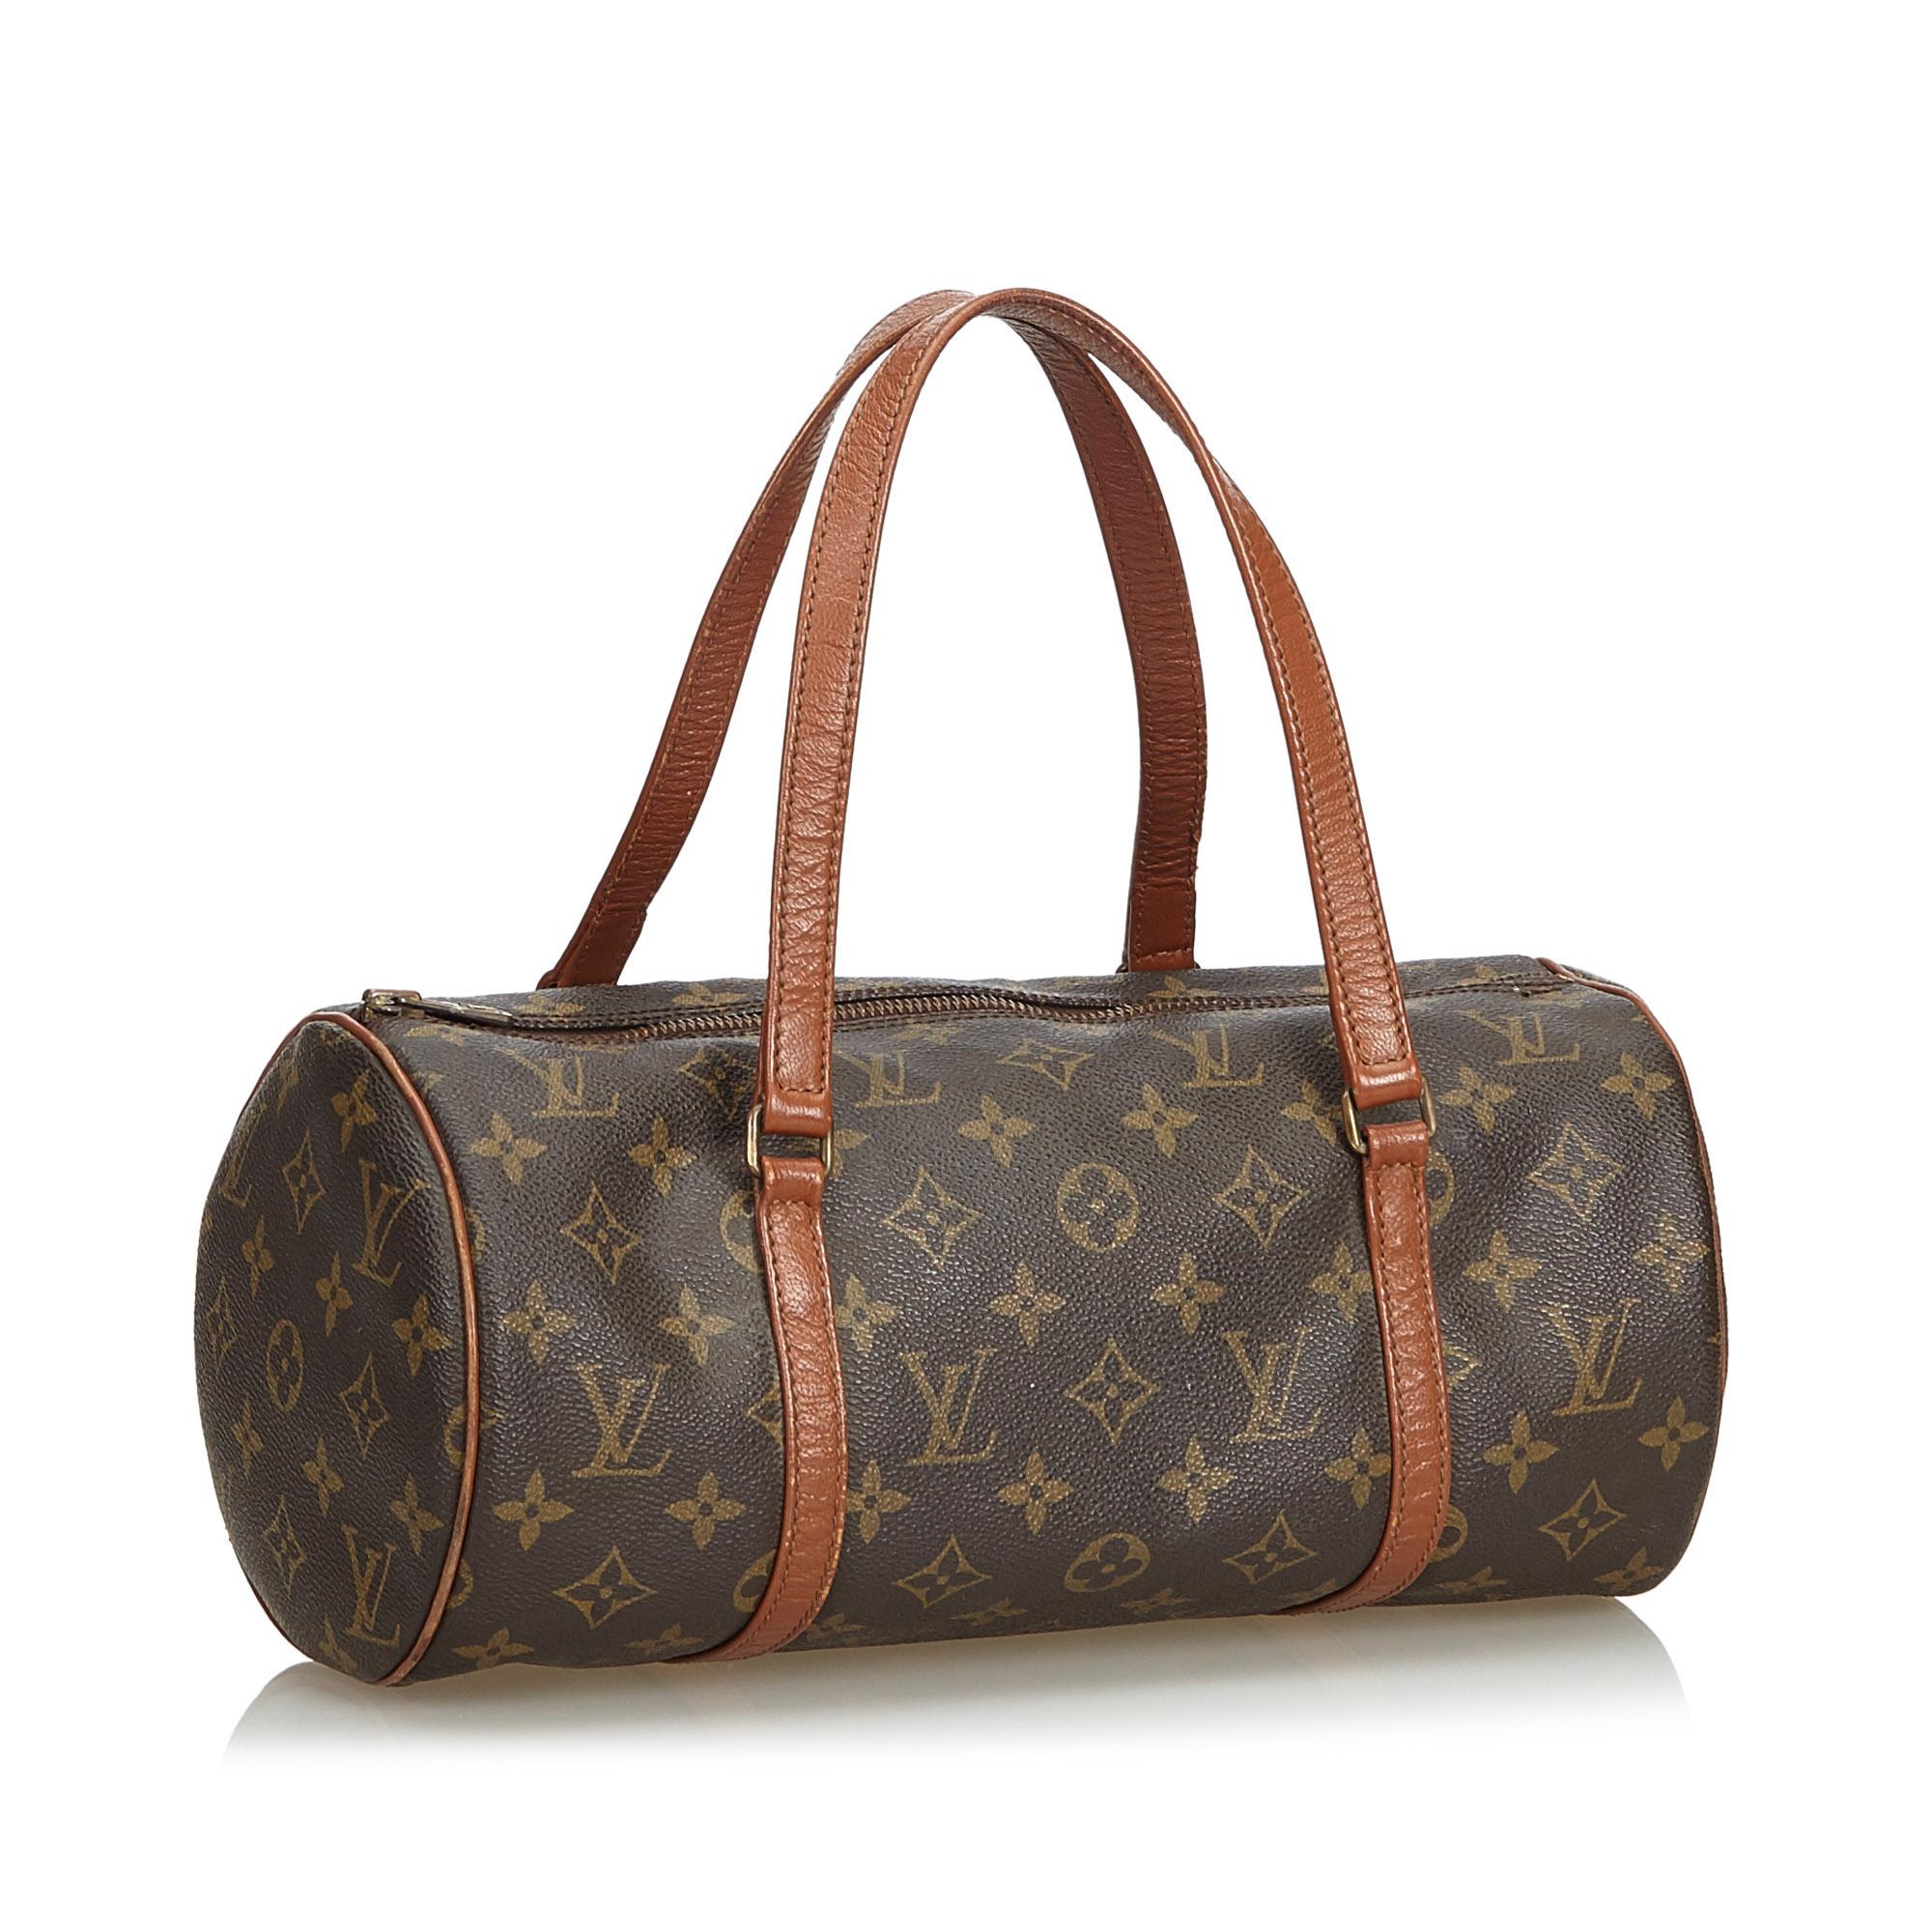 The Papillon 30 features the Monogram canvas, flat leather shoulder straps and trim, and a top zip closure. It carries as B condition rating.

Inclusions: 
This item does not come with inclusions.


Louis Vuitton pieces do not come with an